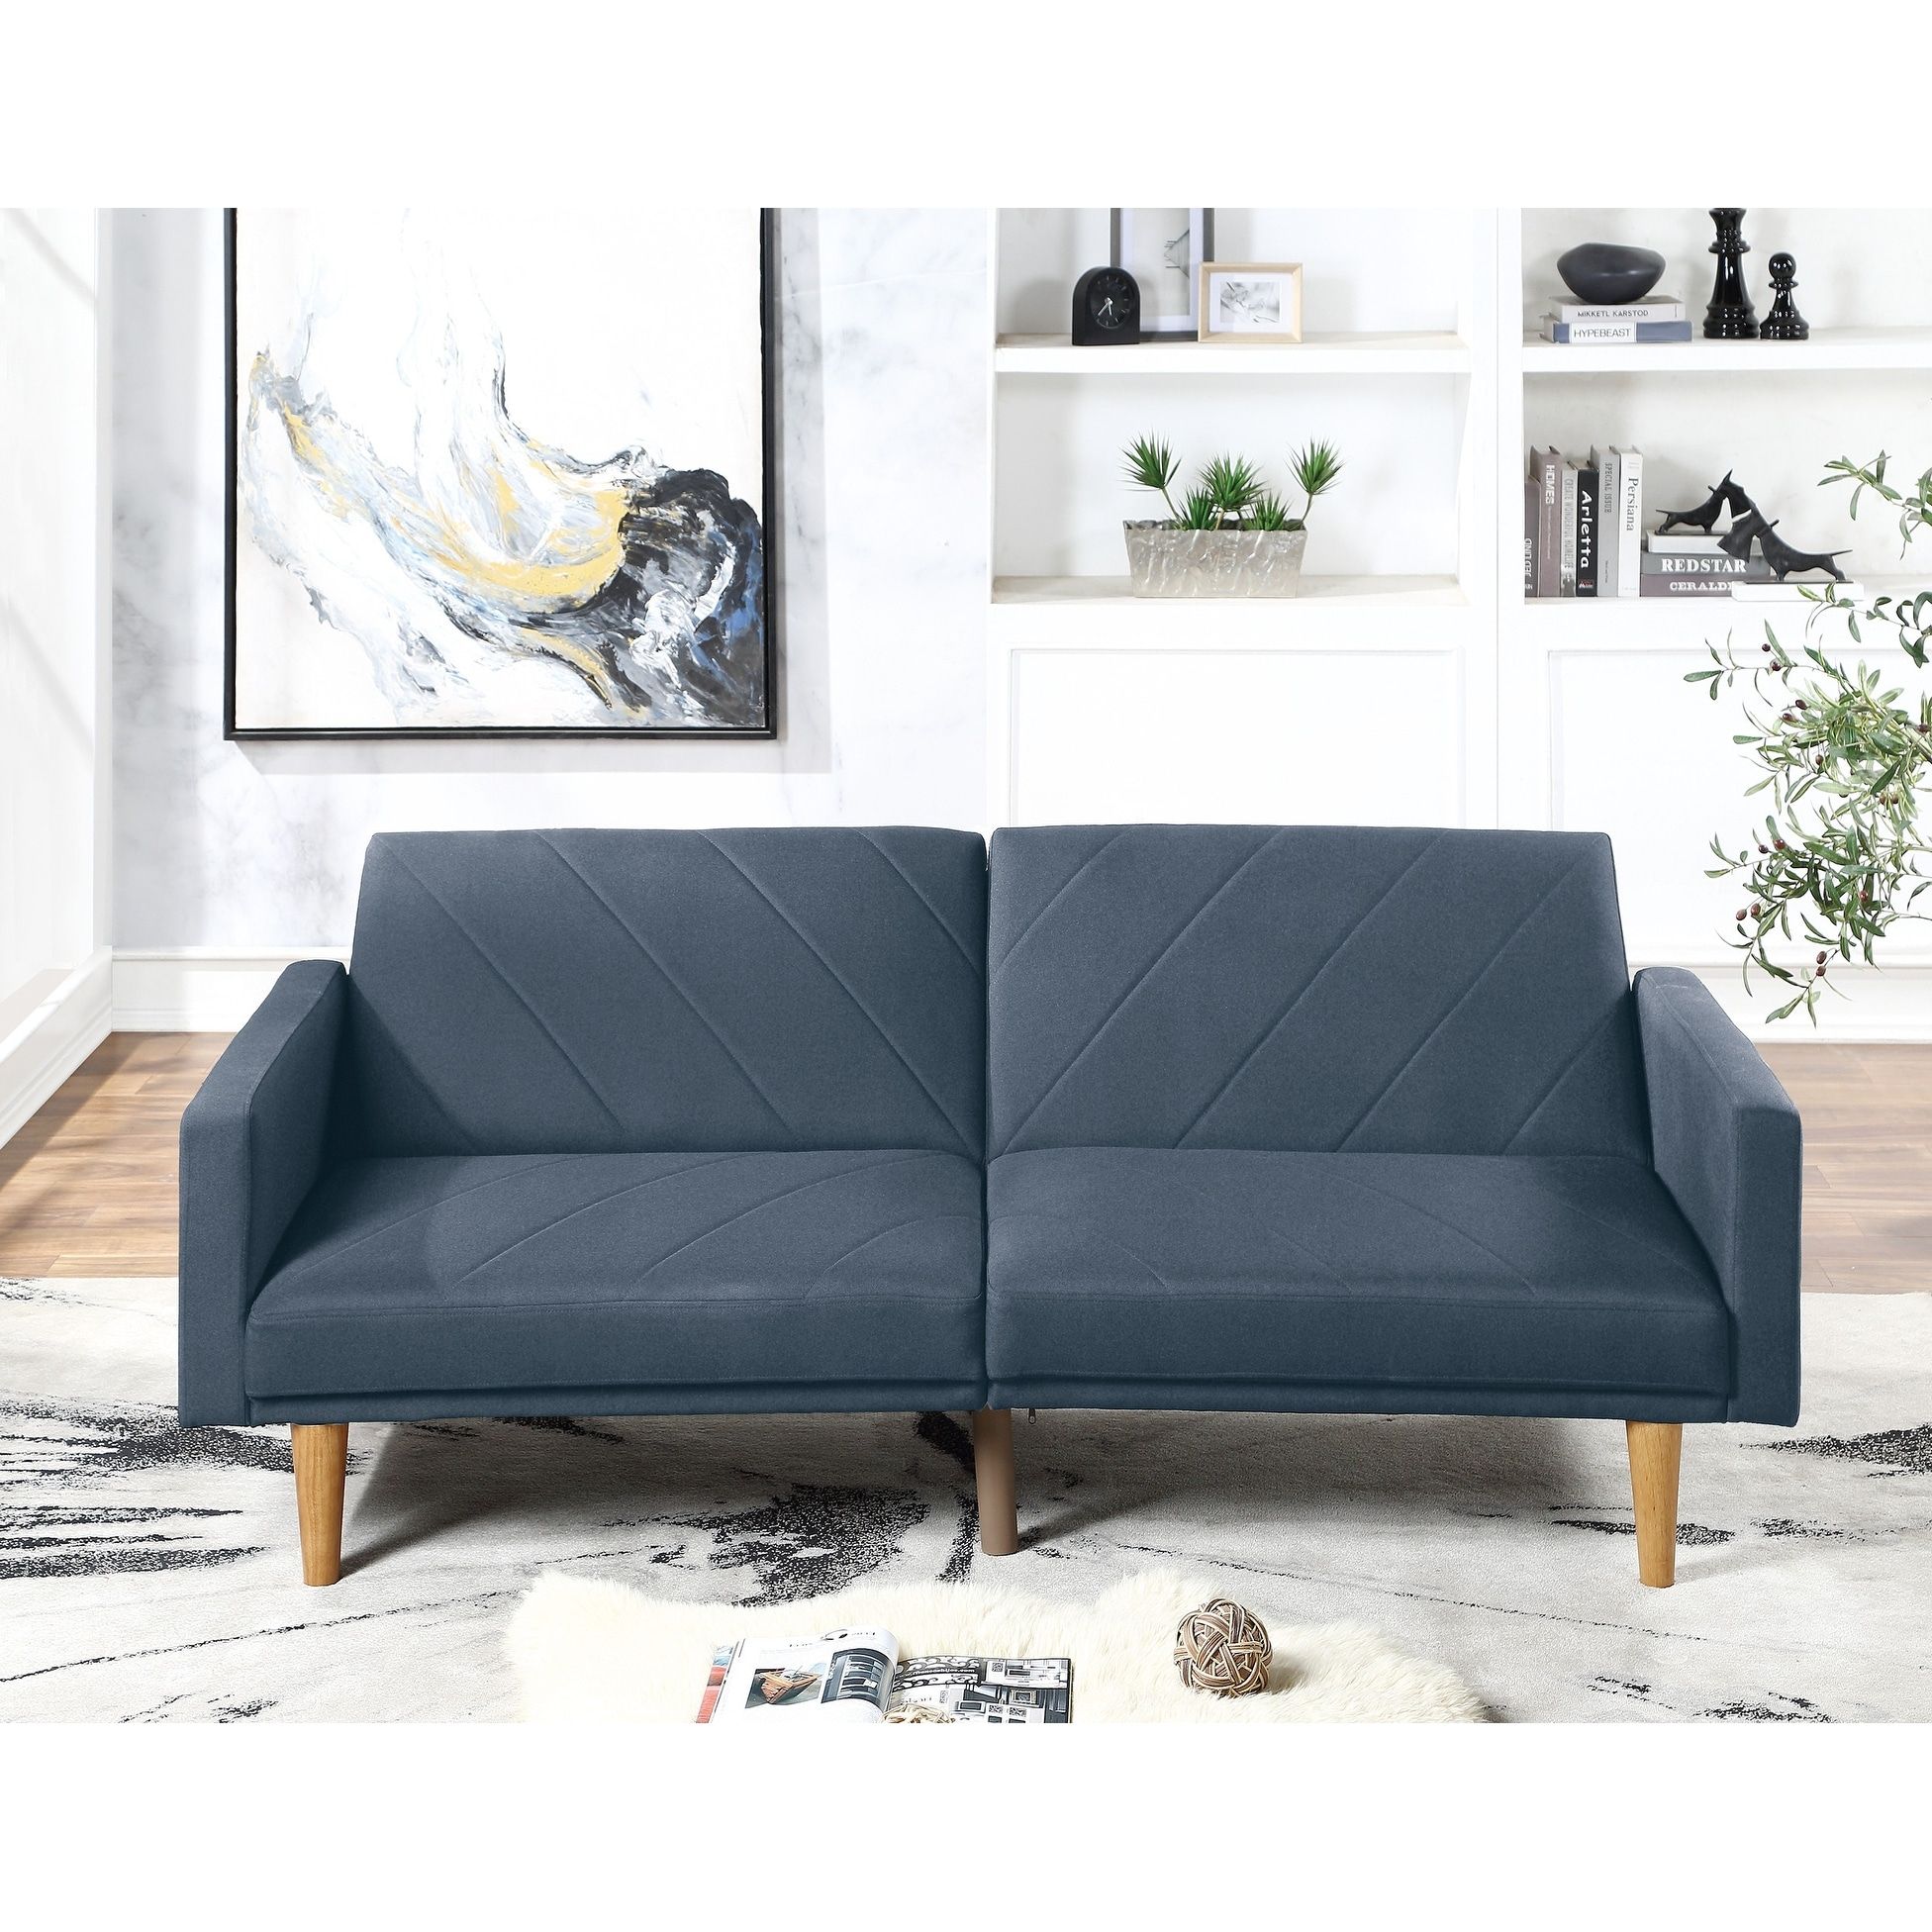 Modern Electric Look 1pc Convertible Sofa Couch Navy Color Linen Like  Fabric Cushion Wooden Legs Living Room – Bed Bath & Beyond – 35204646 With Regard To Modern Blue Linen Sofas (View 6 of 15)